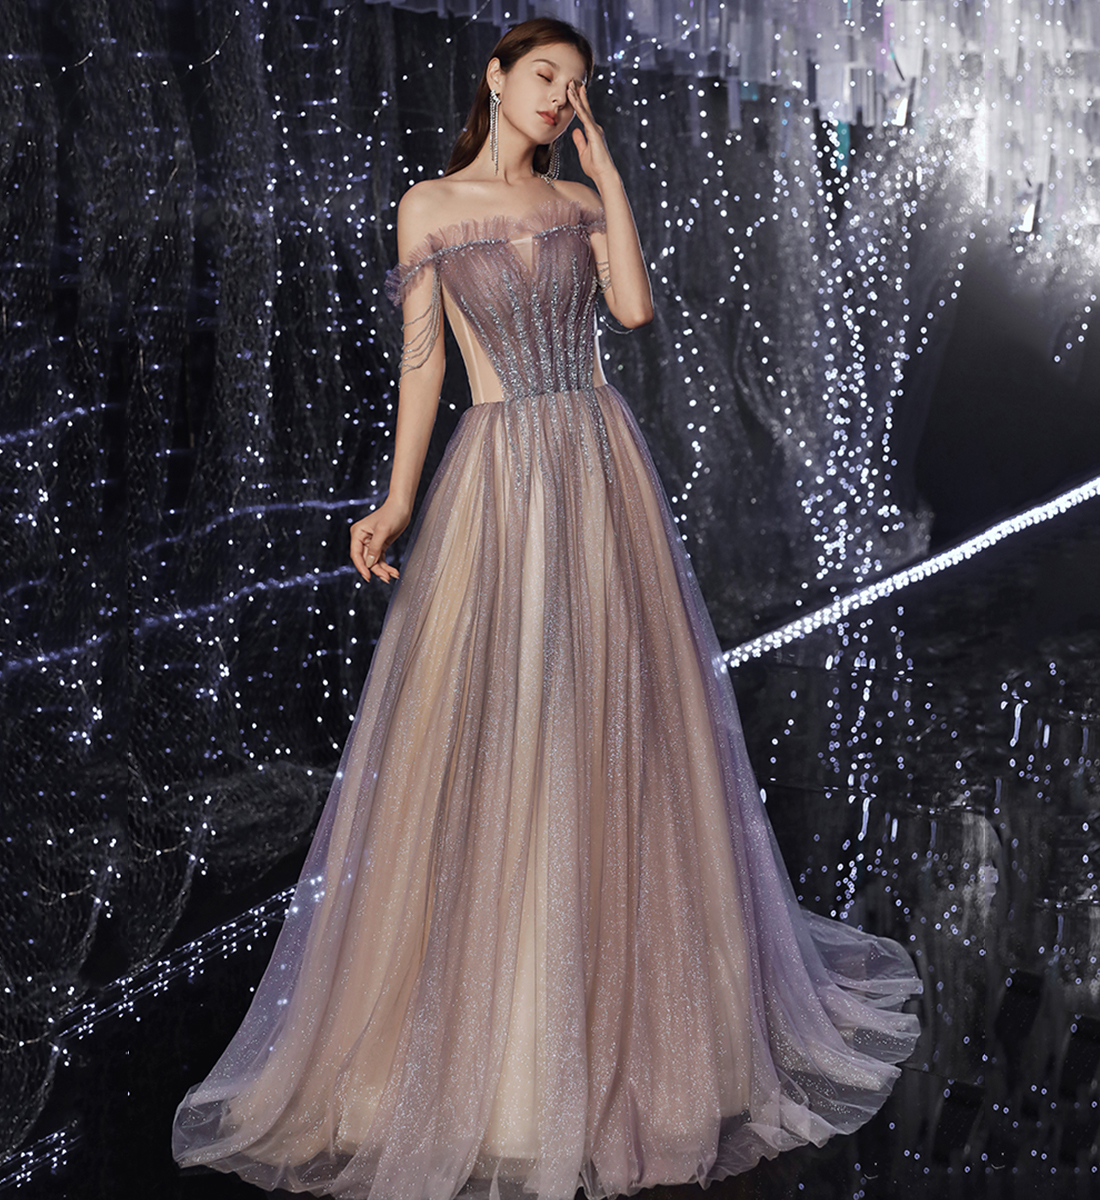 Shiny Tulle Sequins Long Prom Dress Evening Dress